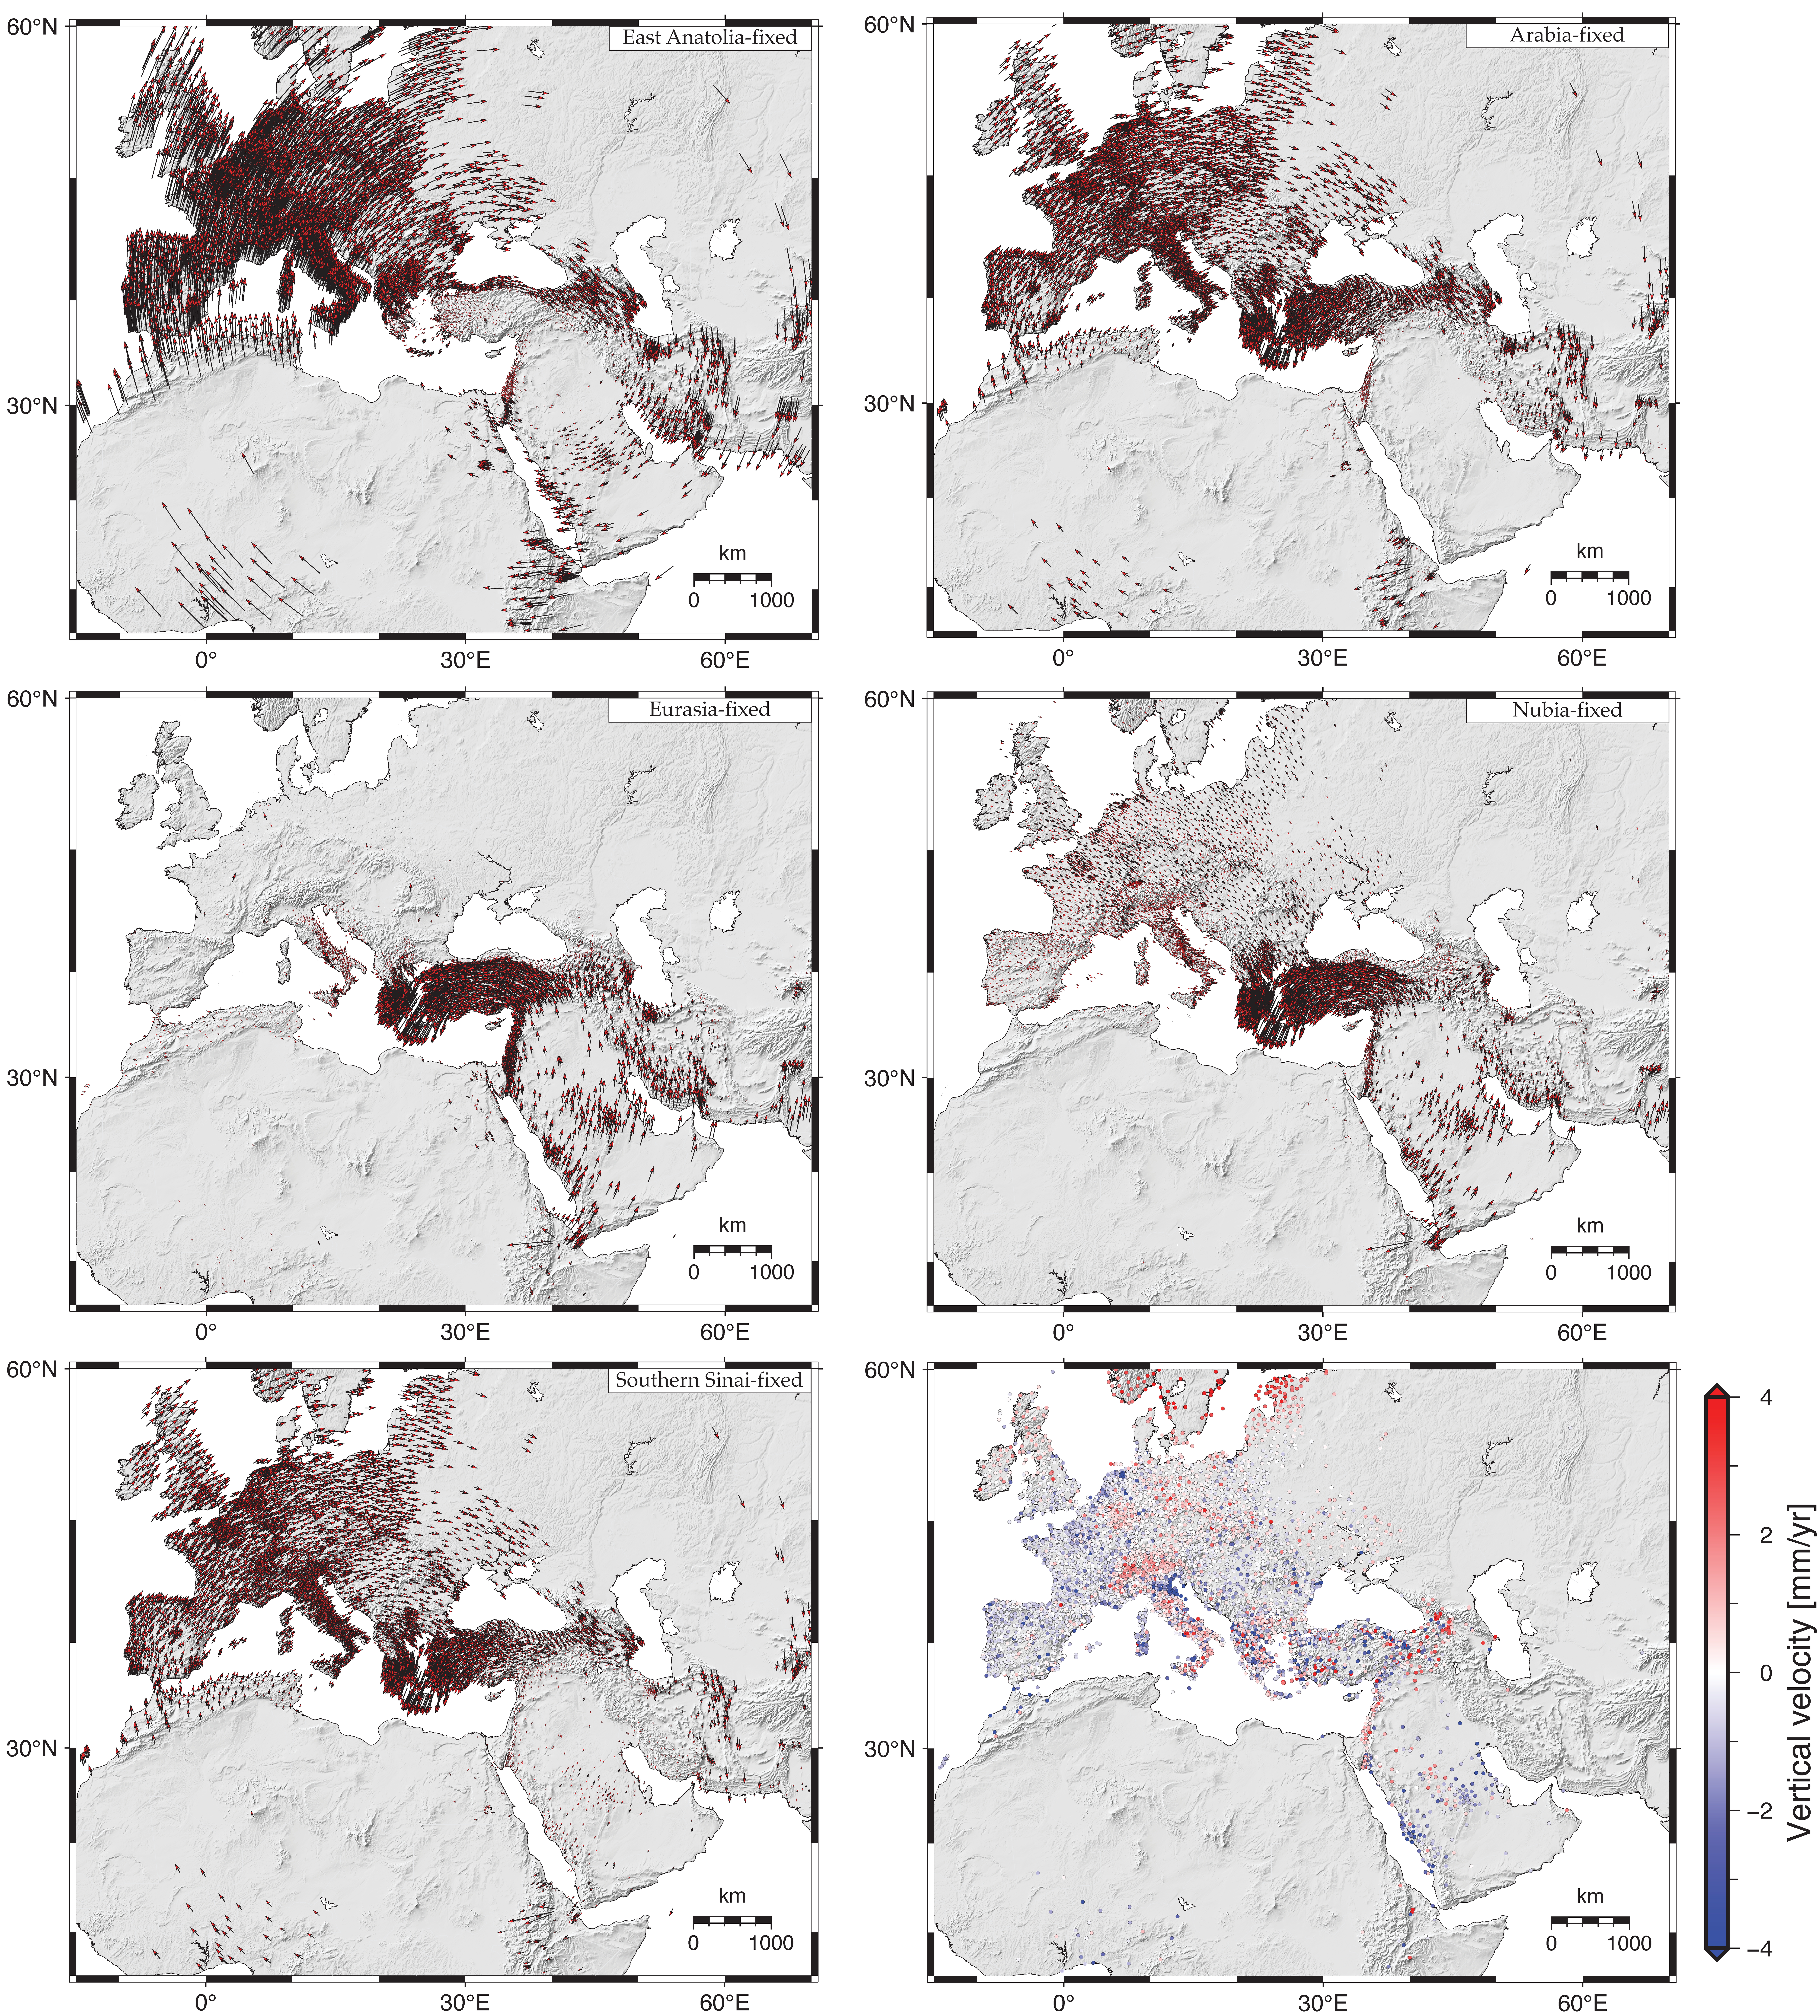 Horizontal and vertical velocity field in the Mediterranean and Middle East areas